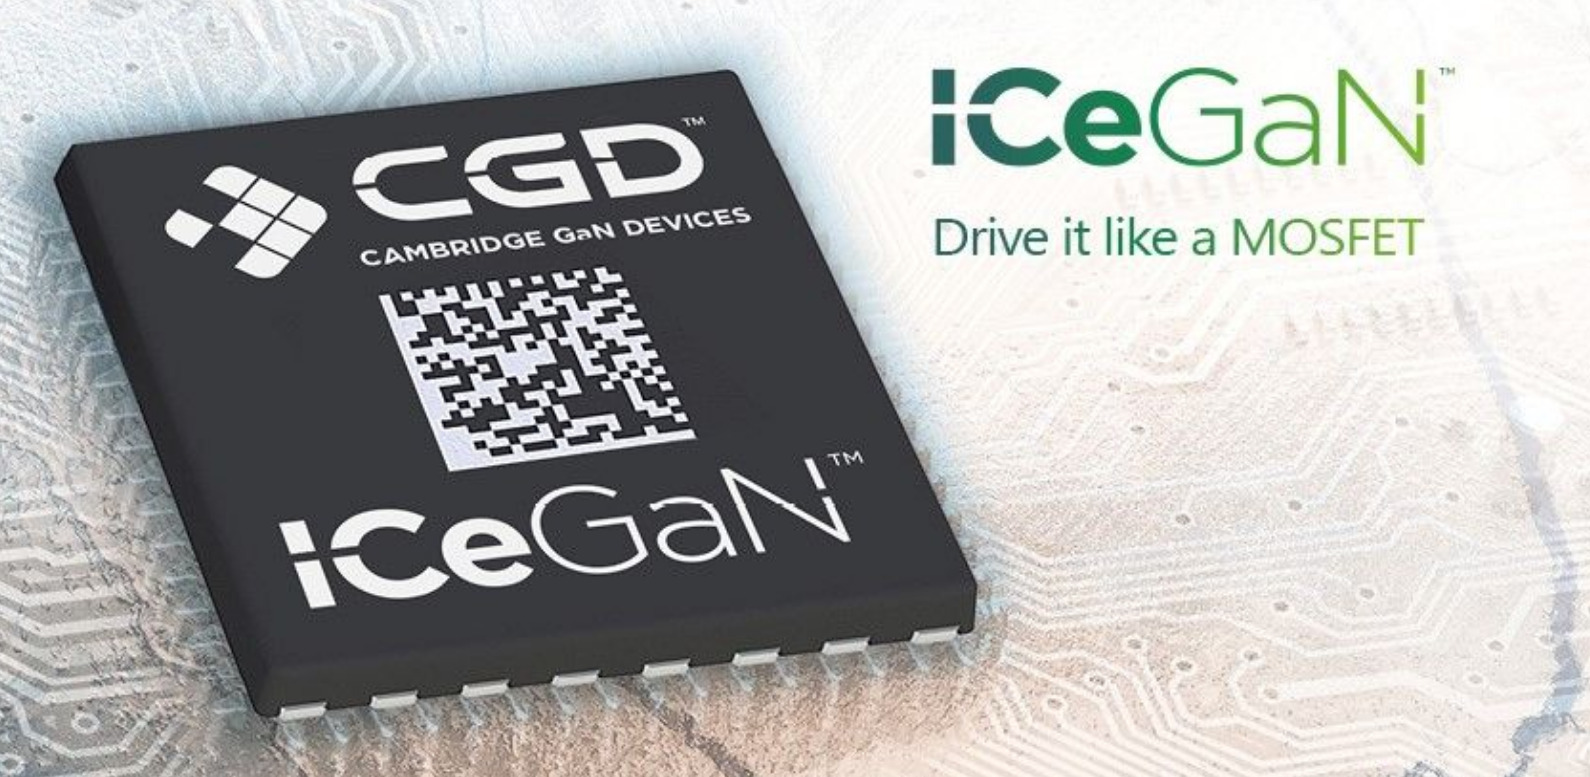 Cambridge GaN devices launched second series of its ICeGaN 650 V Gallium Nitride HEMT family